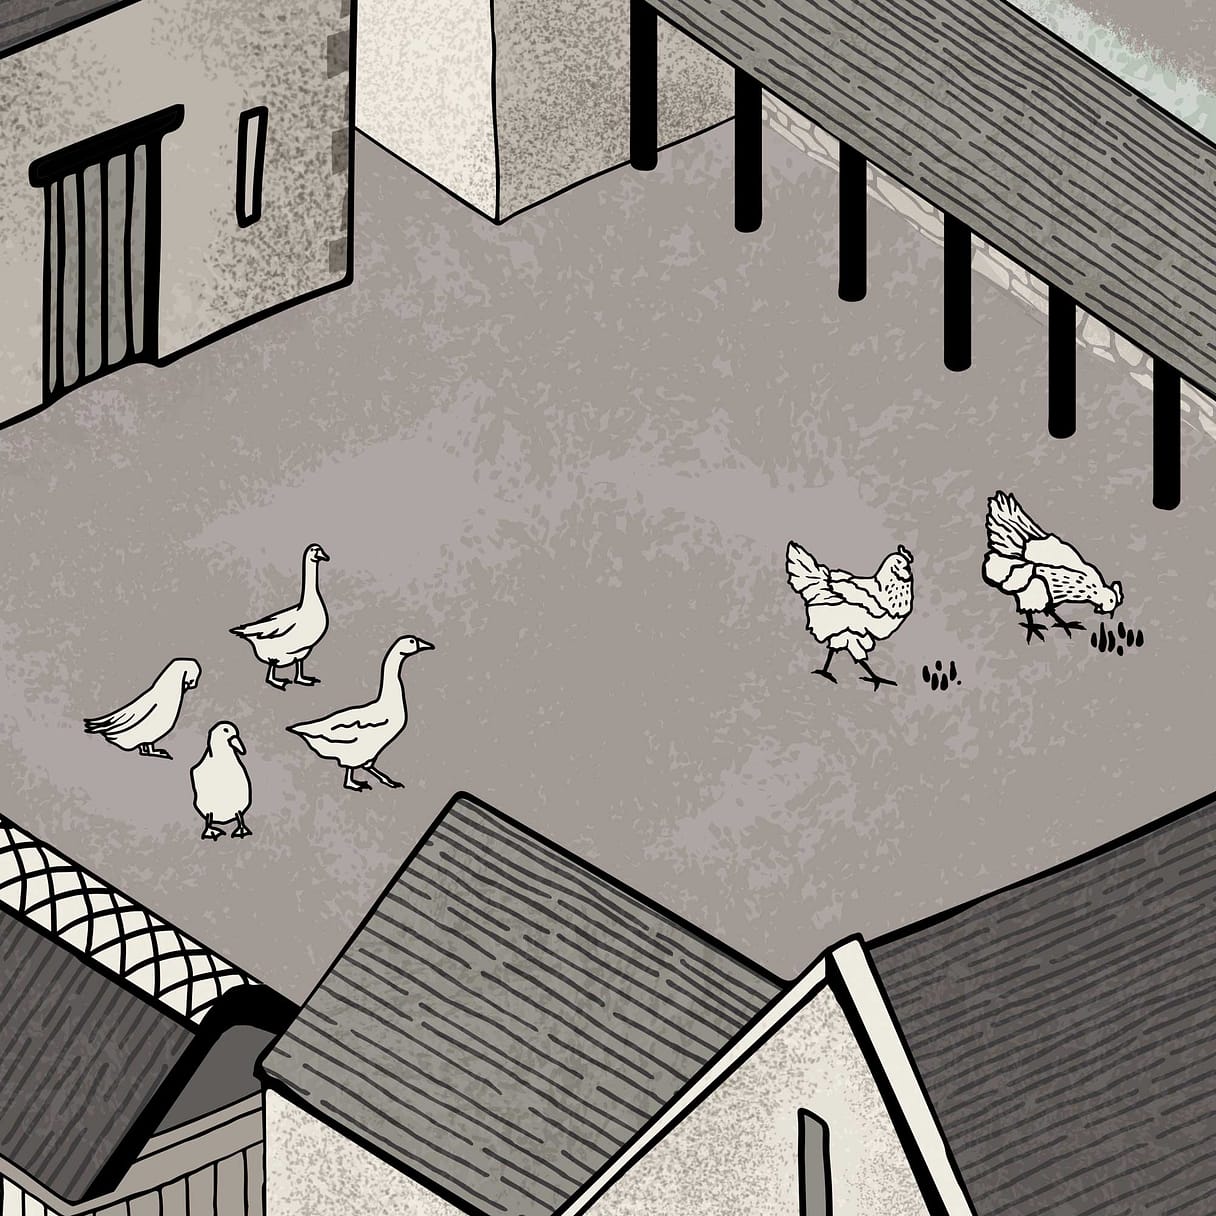 geese ducks and chicken in the courtyard map illustration